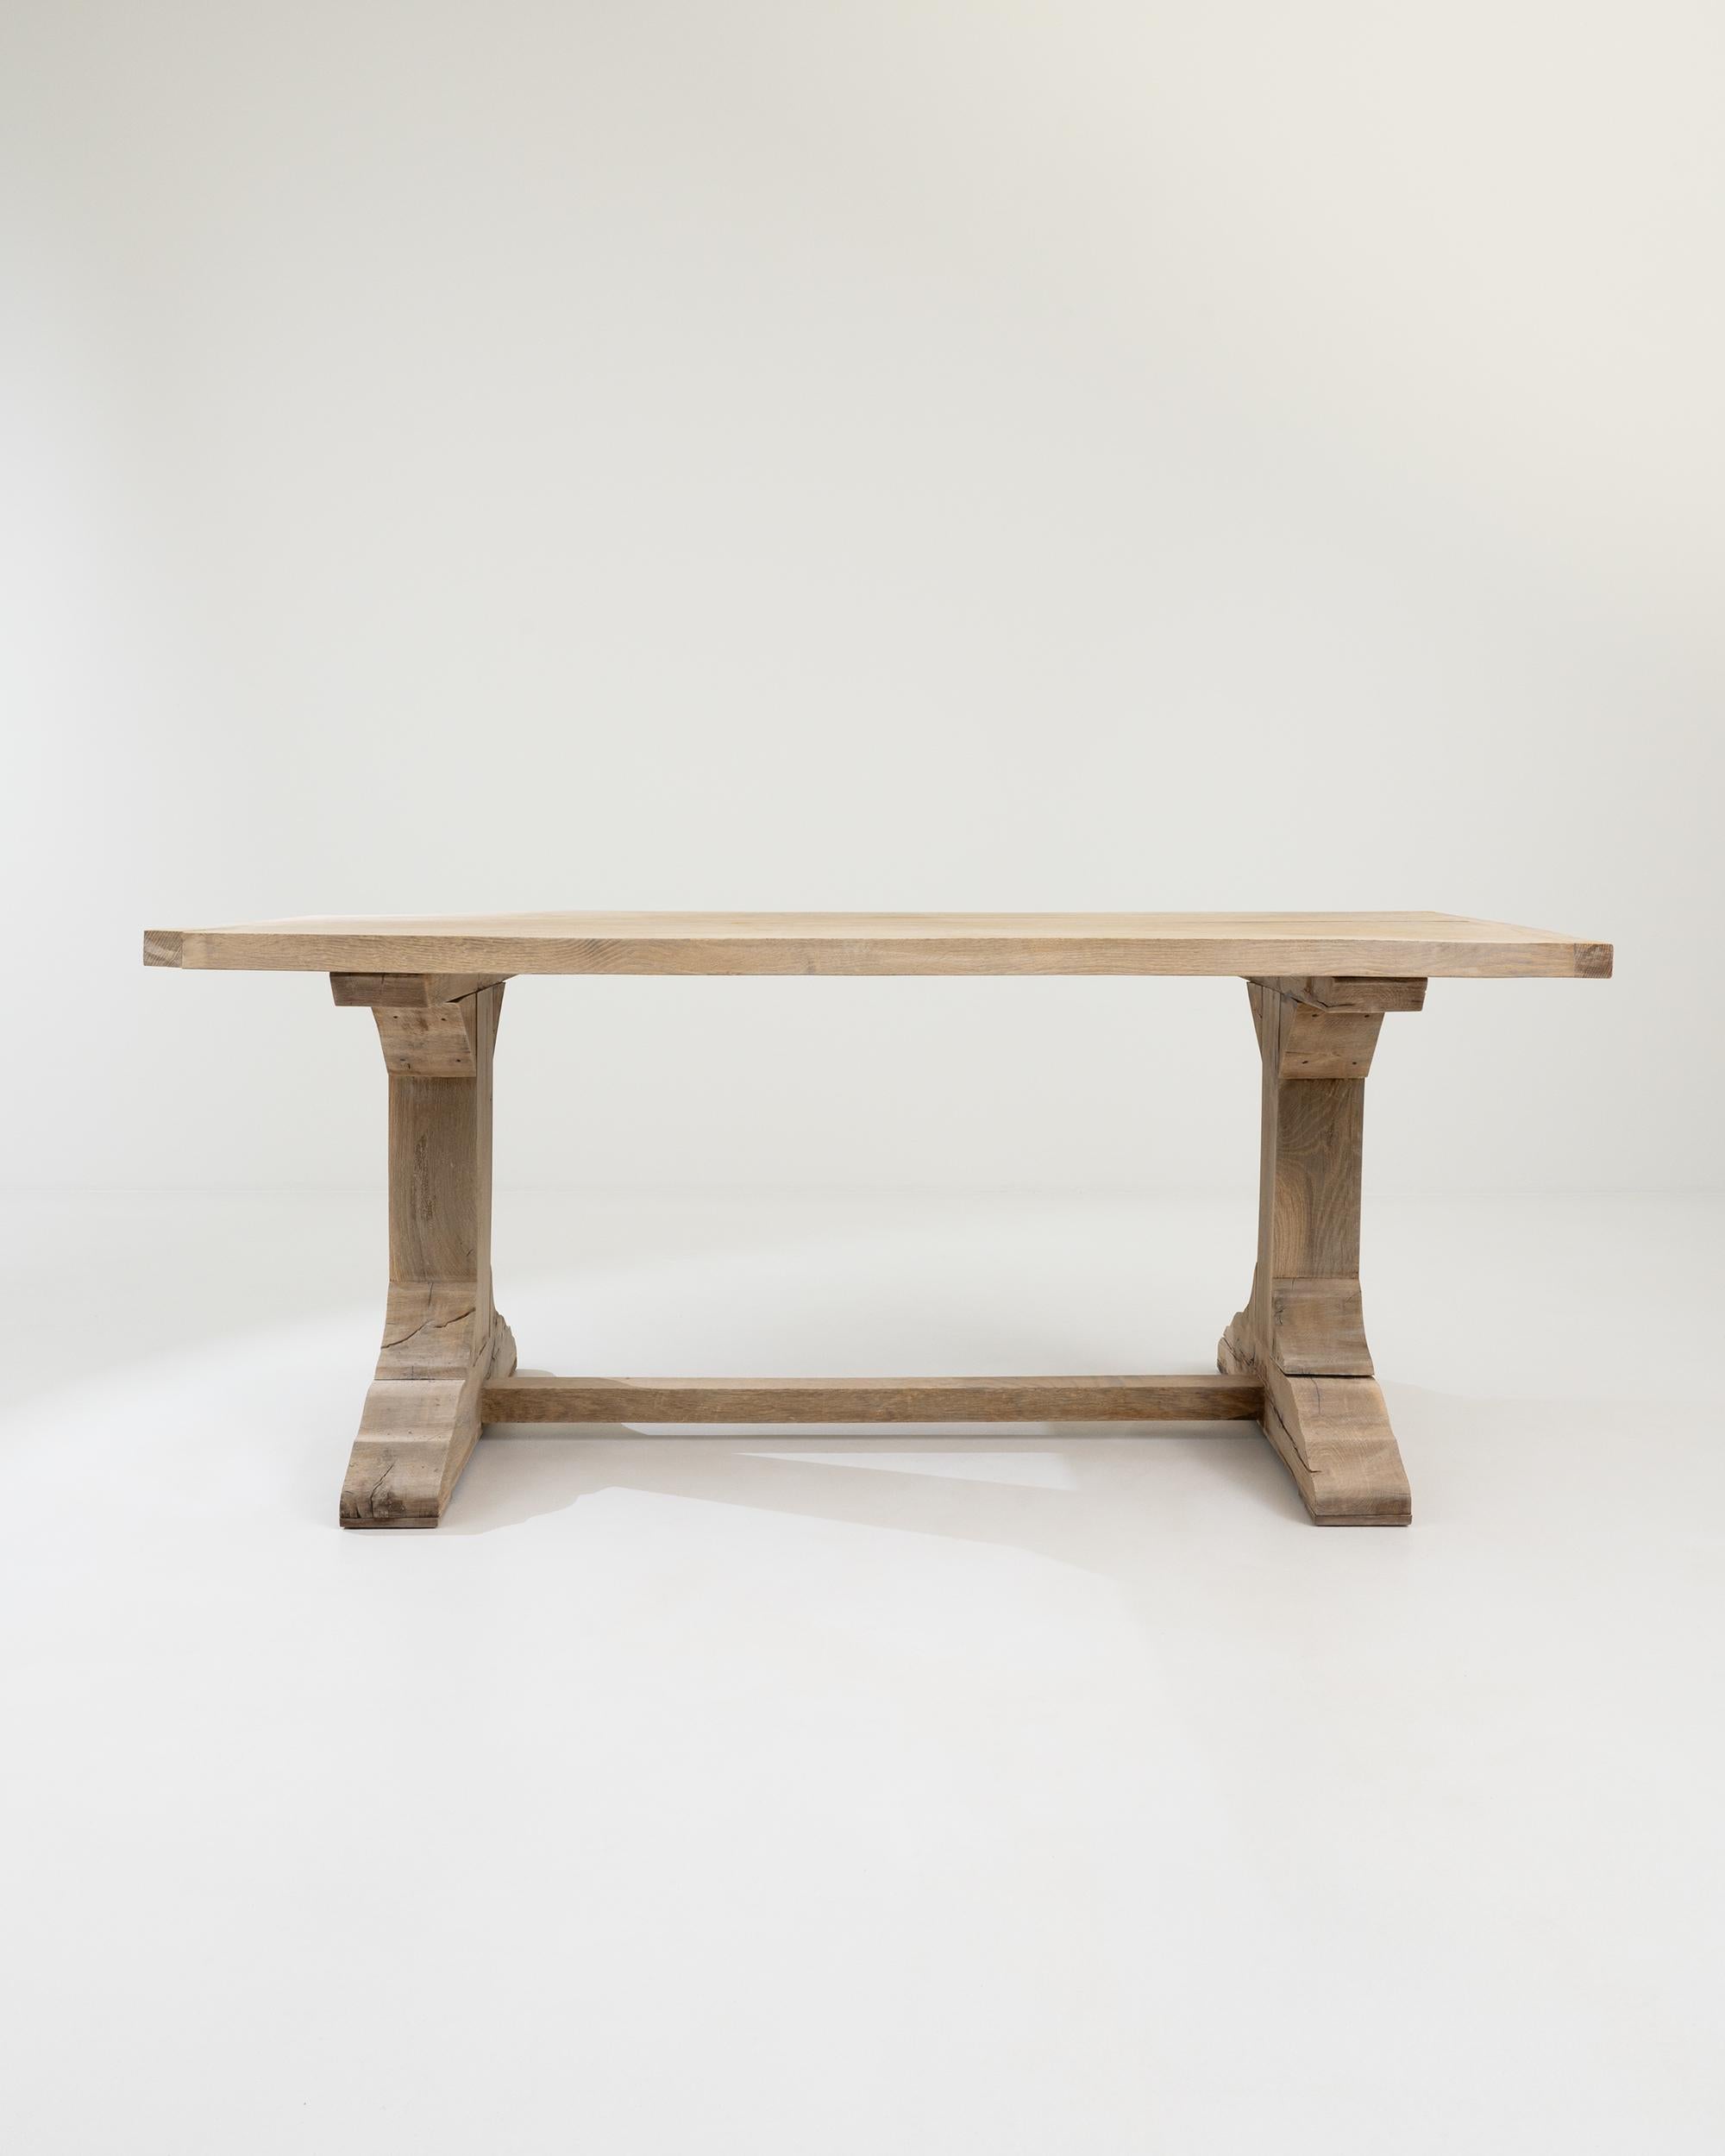 The clean, solid form of this vintage oak dining table has a timeless rustic simplicity. Built in Belgium in the 20th century, a rectangular tabletop rests atop a pair of trestle legs. The subtle contour of the wide feet and the curved form of the